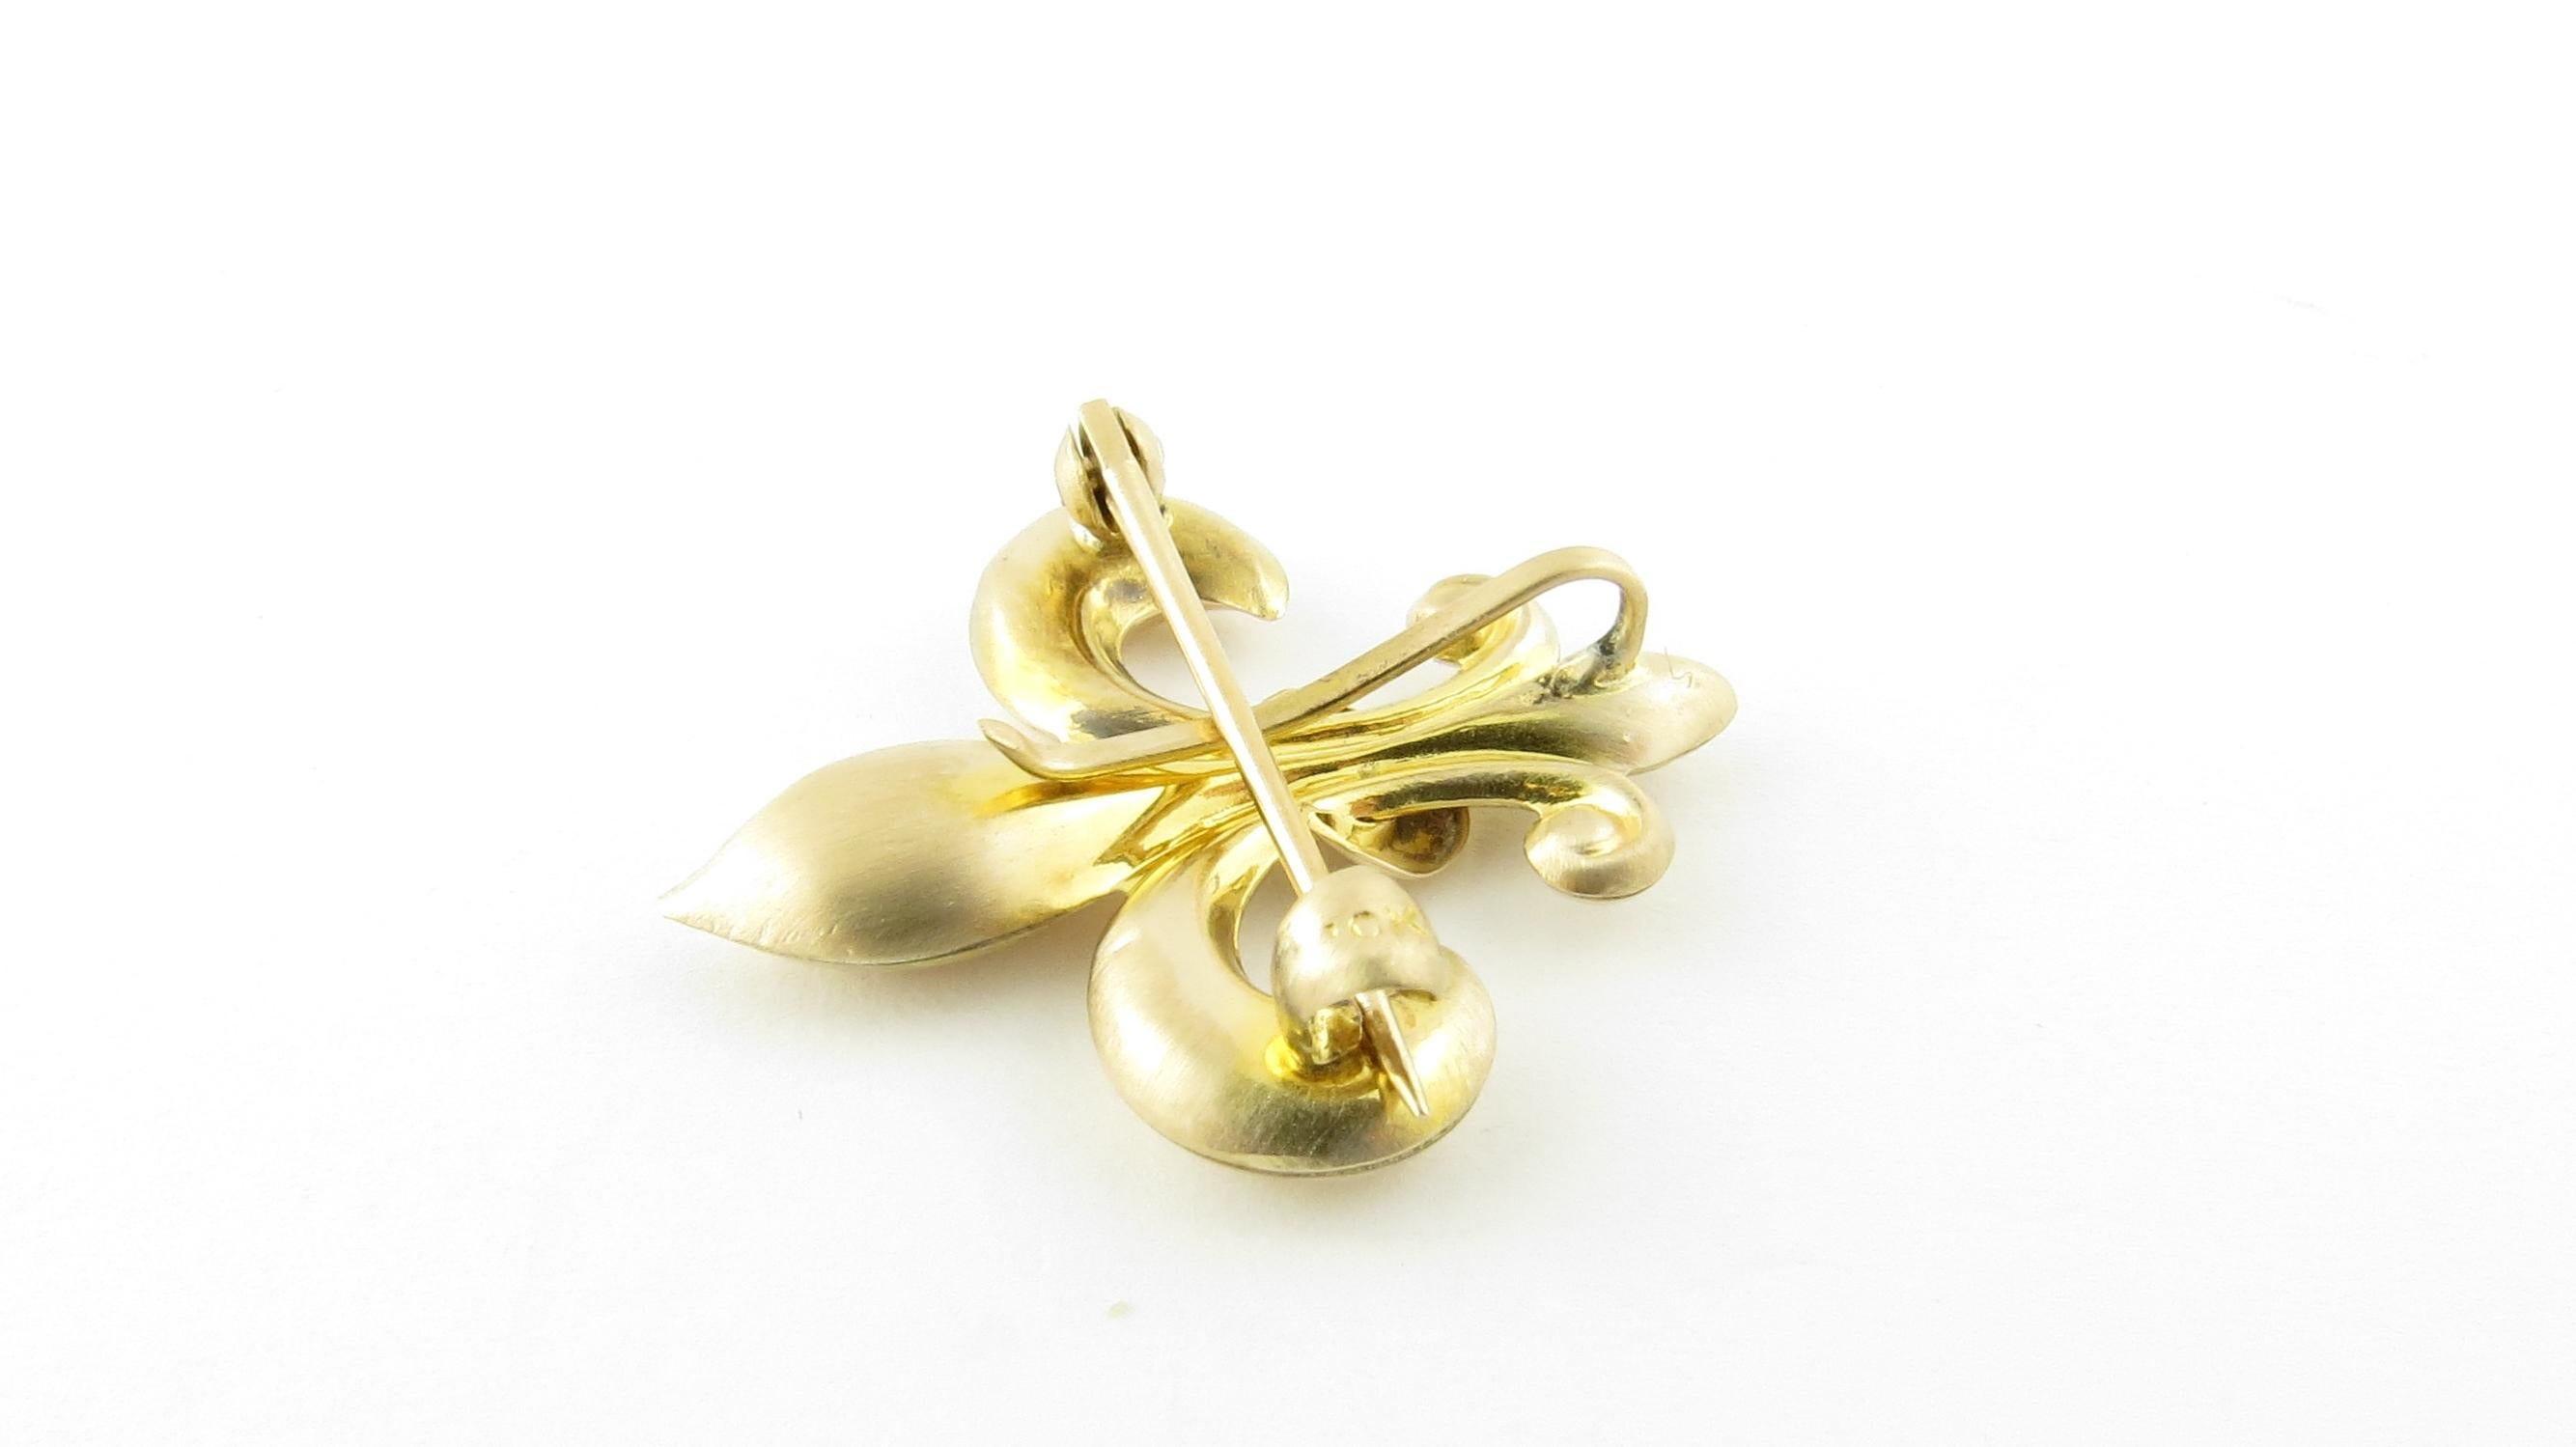 Vintage 10 Karat Yellow Gold Fleur De Lis Brooch/Pendant.

This lovely brooch features a beautifully detailed fleur de lis crafted in polished 10K yellow gold.

Size: 25 mm x 22 mm

Weight: 0.9 dwt. / 1.5gr.

Stamped: 10K

Very good condition,